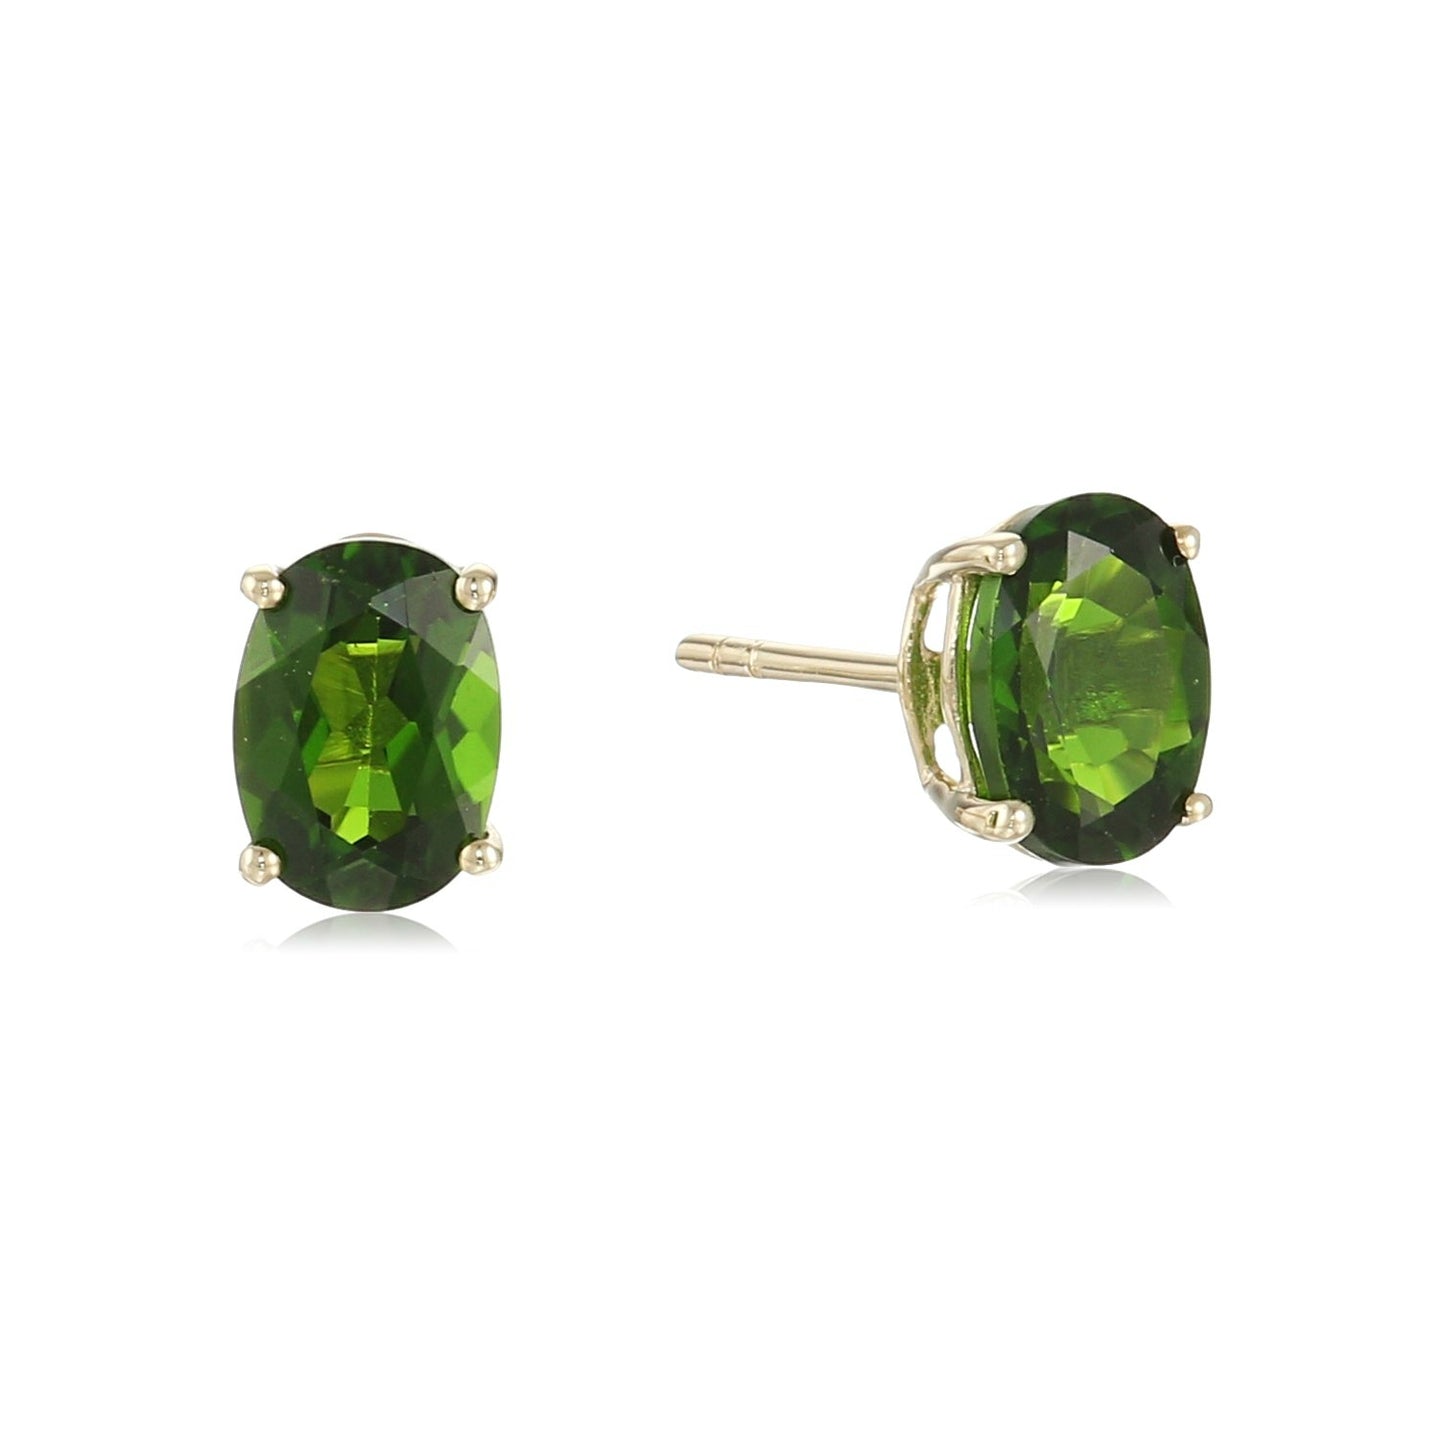 10k Yellow Gold Chrome Diopside Oval Stud Earrings - pinctore